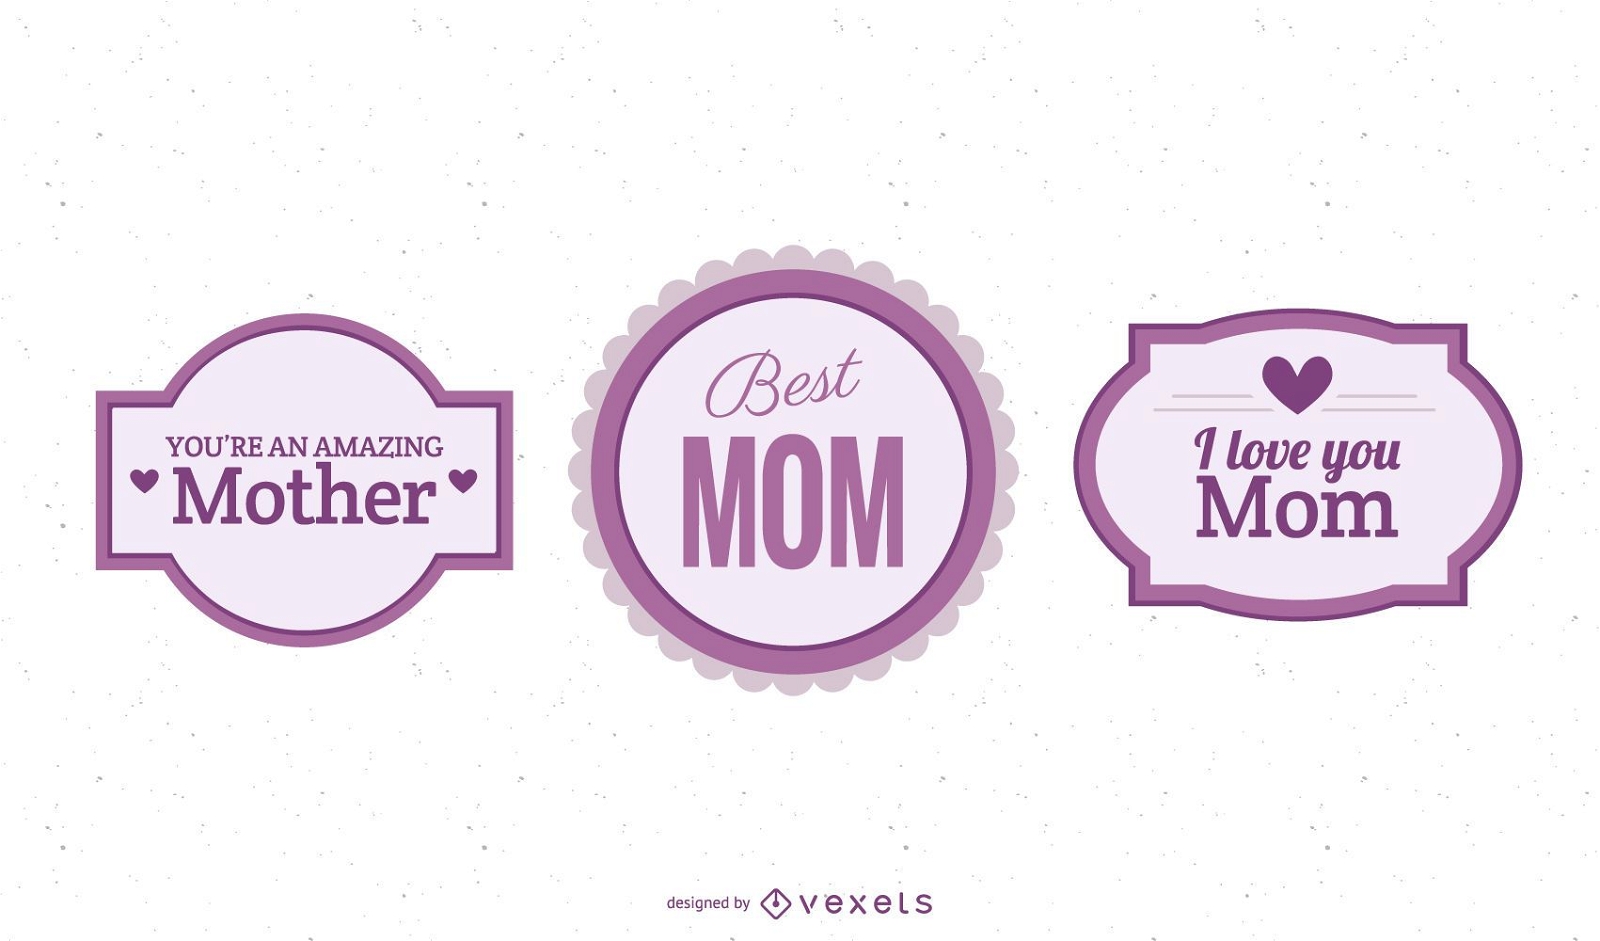 Colorful Mother?s Day Labels Pack